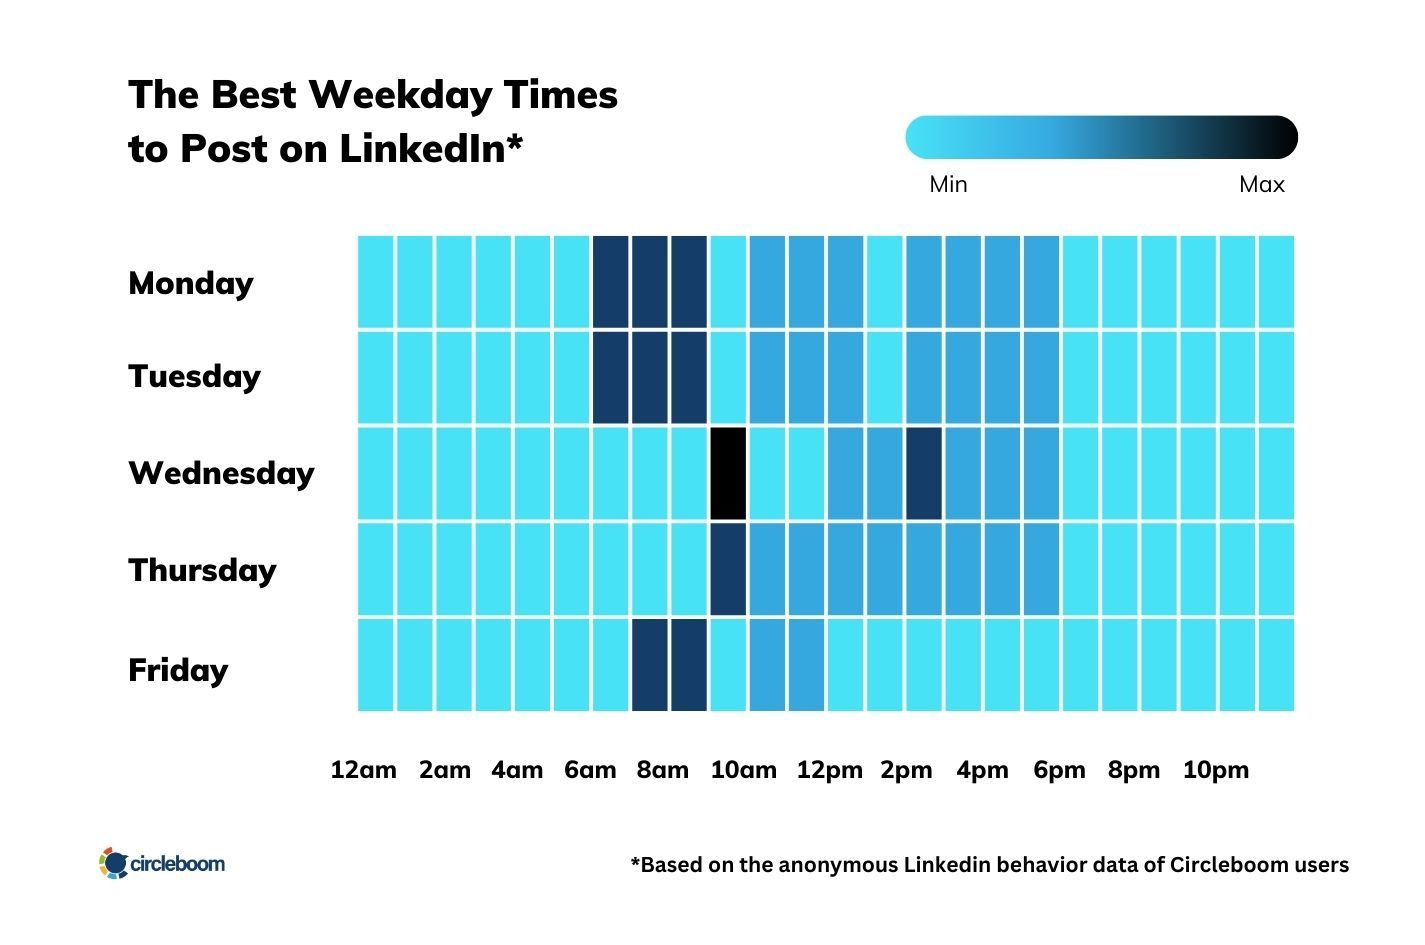 Best weekday times to post to LinkedIn are Wednesday and Thursday mornings.